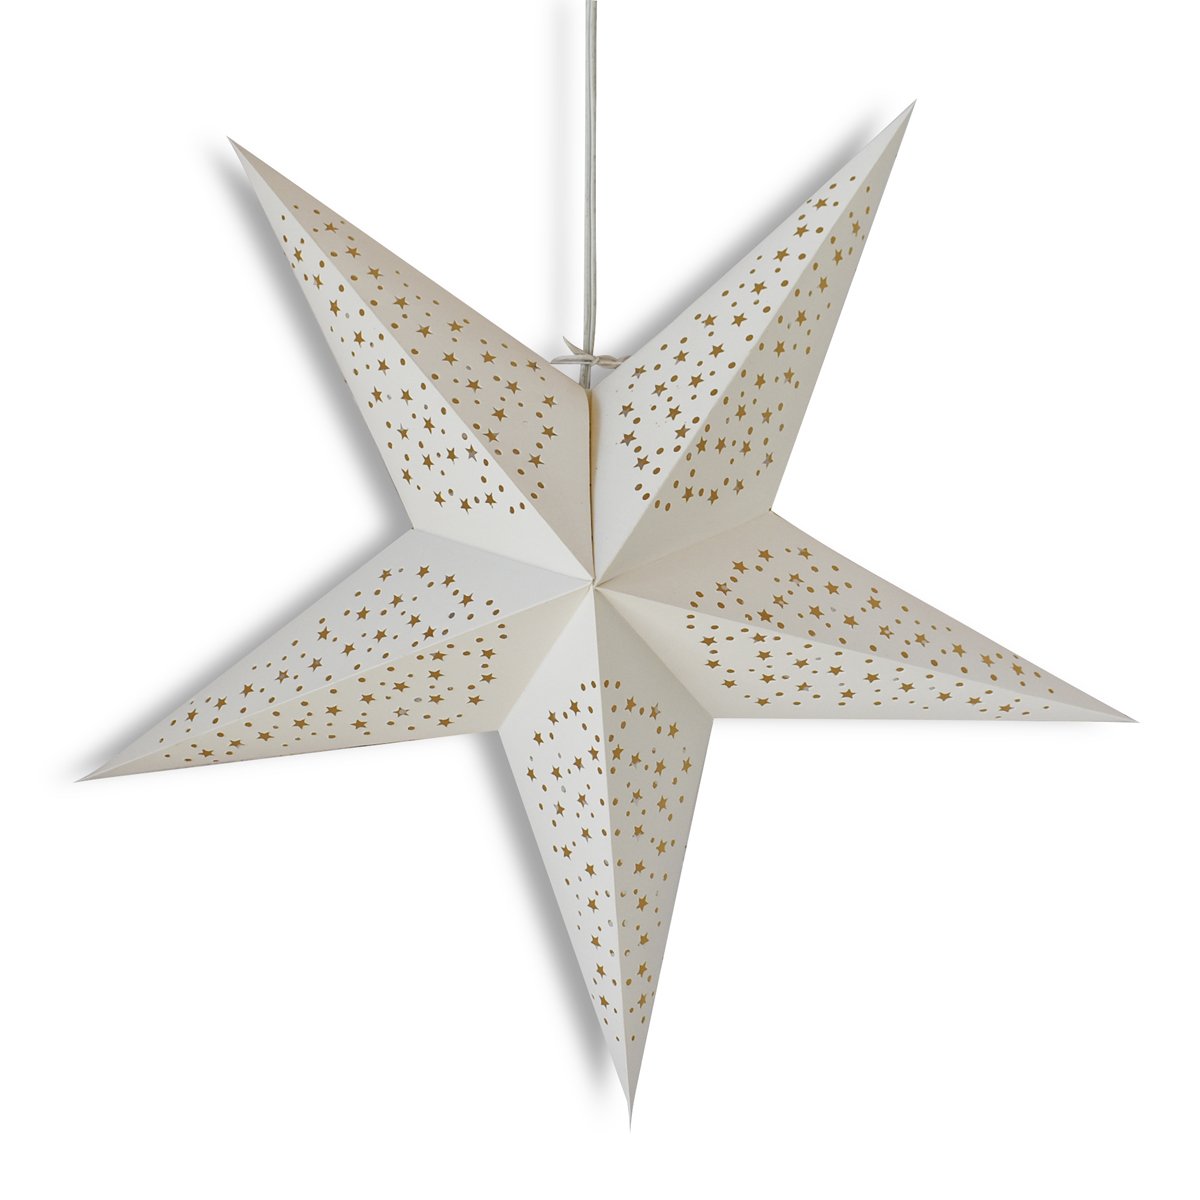 3-PACK + Cord | 24" White 'Thousand Stars' Paper Star Lantern and Lamp Cord Hanging Decoration - AsianImportStore.com - B2B Wholesale Lighting and Decor